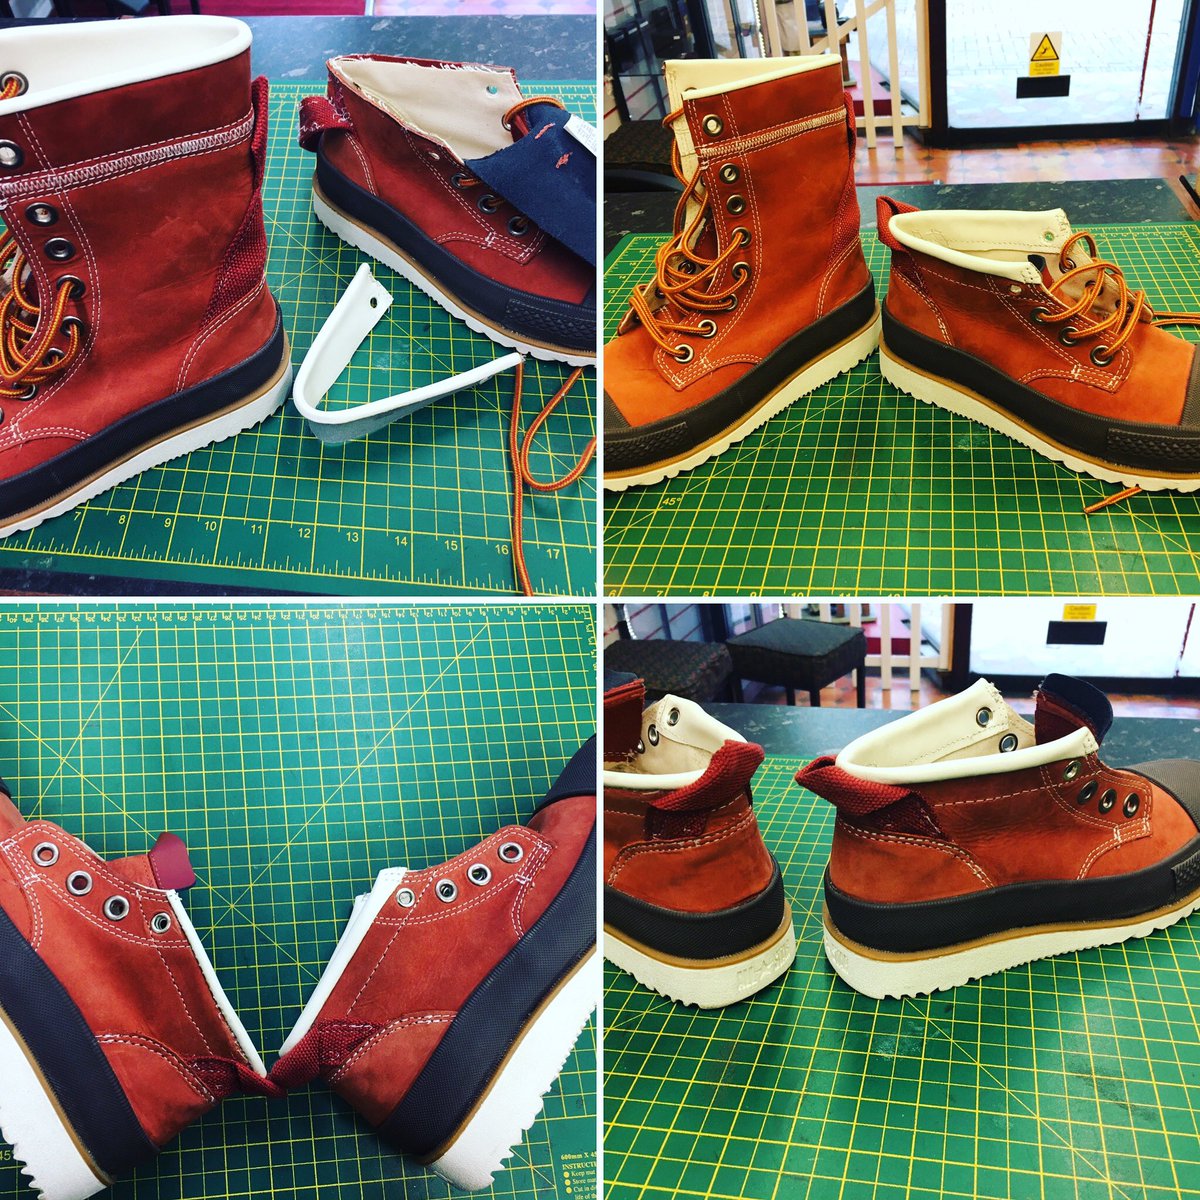 Customer wanted their Converse All Star Hi Rise making into trainers. I think the end result was quite good!
.
.
.
.

#TheWorksopHeelBar #worksop #worksopbusiness #shoplocal #supportlocalbusiness #cobbler #shoerepair #keycutting #newheels #engraving #watchbatteries